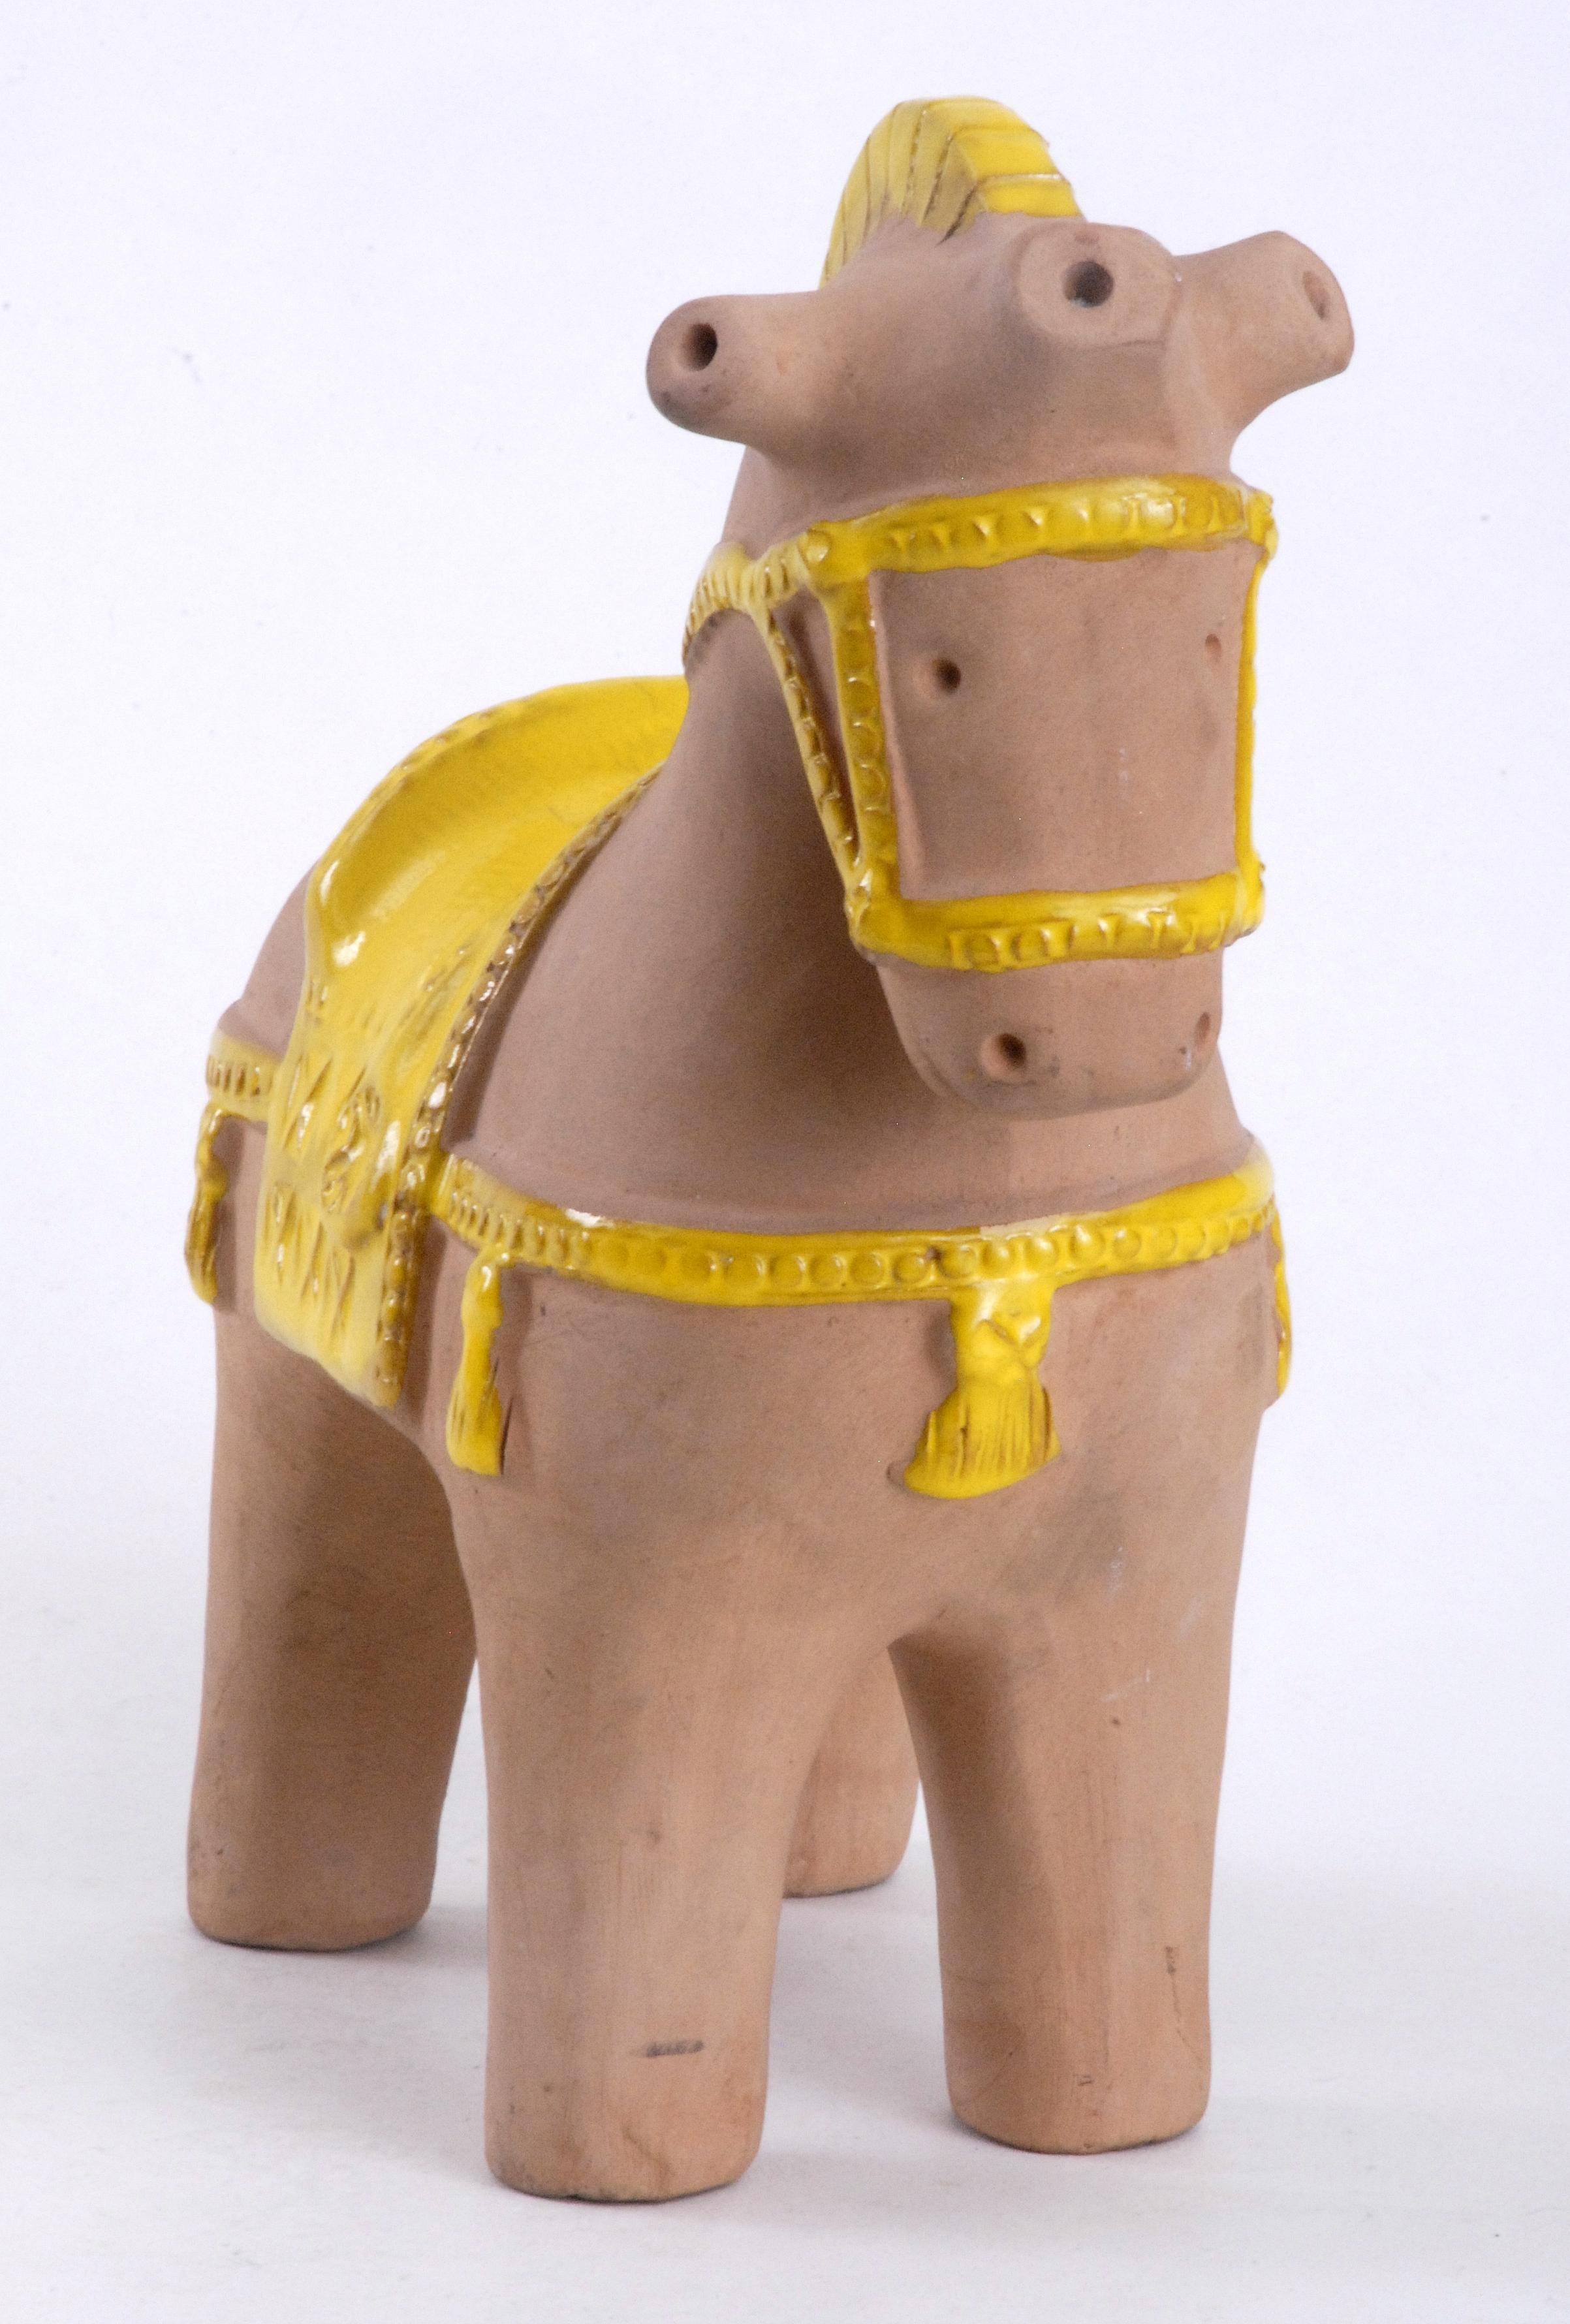 Aldo Londi designed this Chinese styled horse in the 1960s and there is endless variations on the glazes used. All the trappings on this horse have been glazed in a brilliant yellow over the unglazed natural clay. There are some minor marks on the